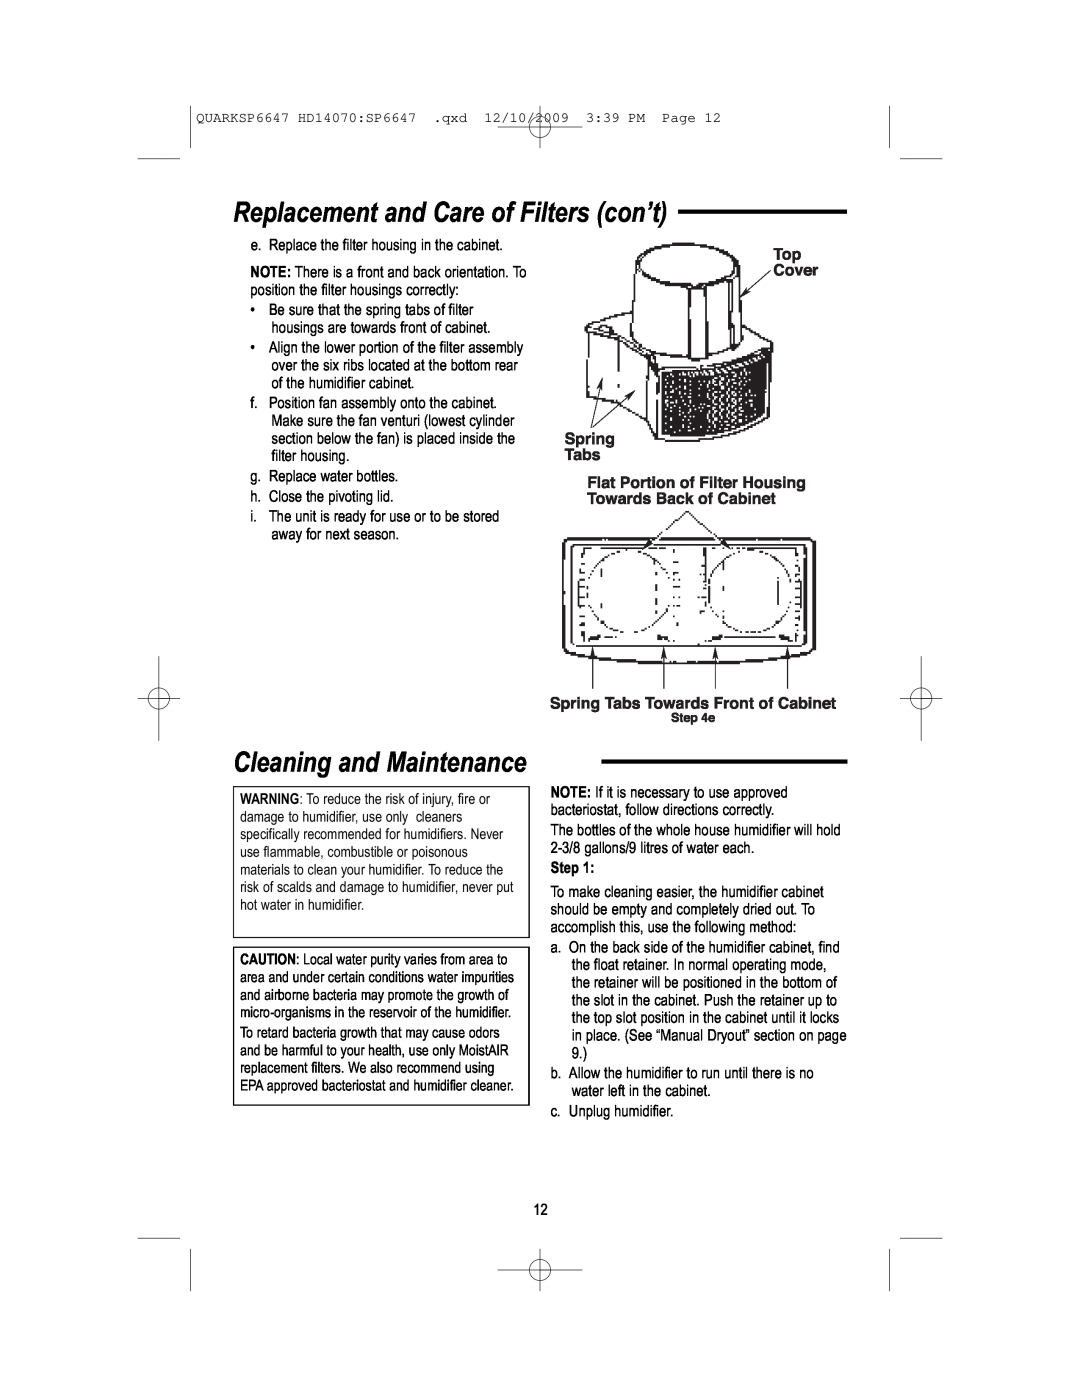 MoistAir HD14070 owner manual Replacement and Care of Filters con’t, Cleaning and Maintenance, Step 